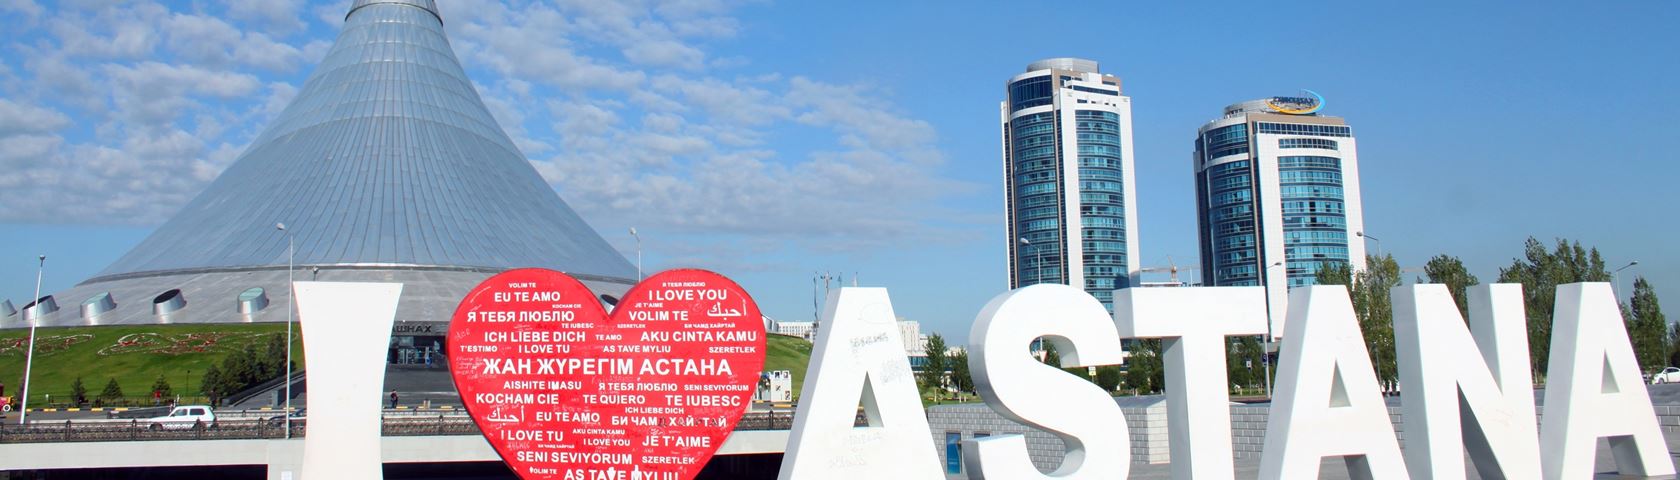 From Astana With Love - Commercial Building - HD Wallpaper 